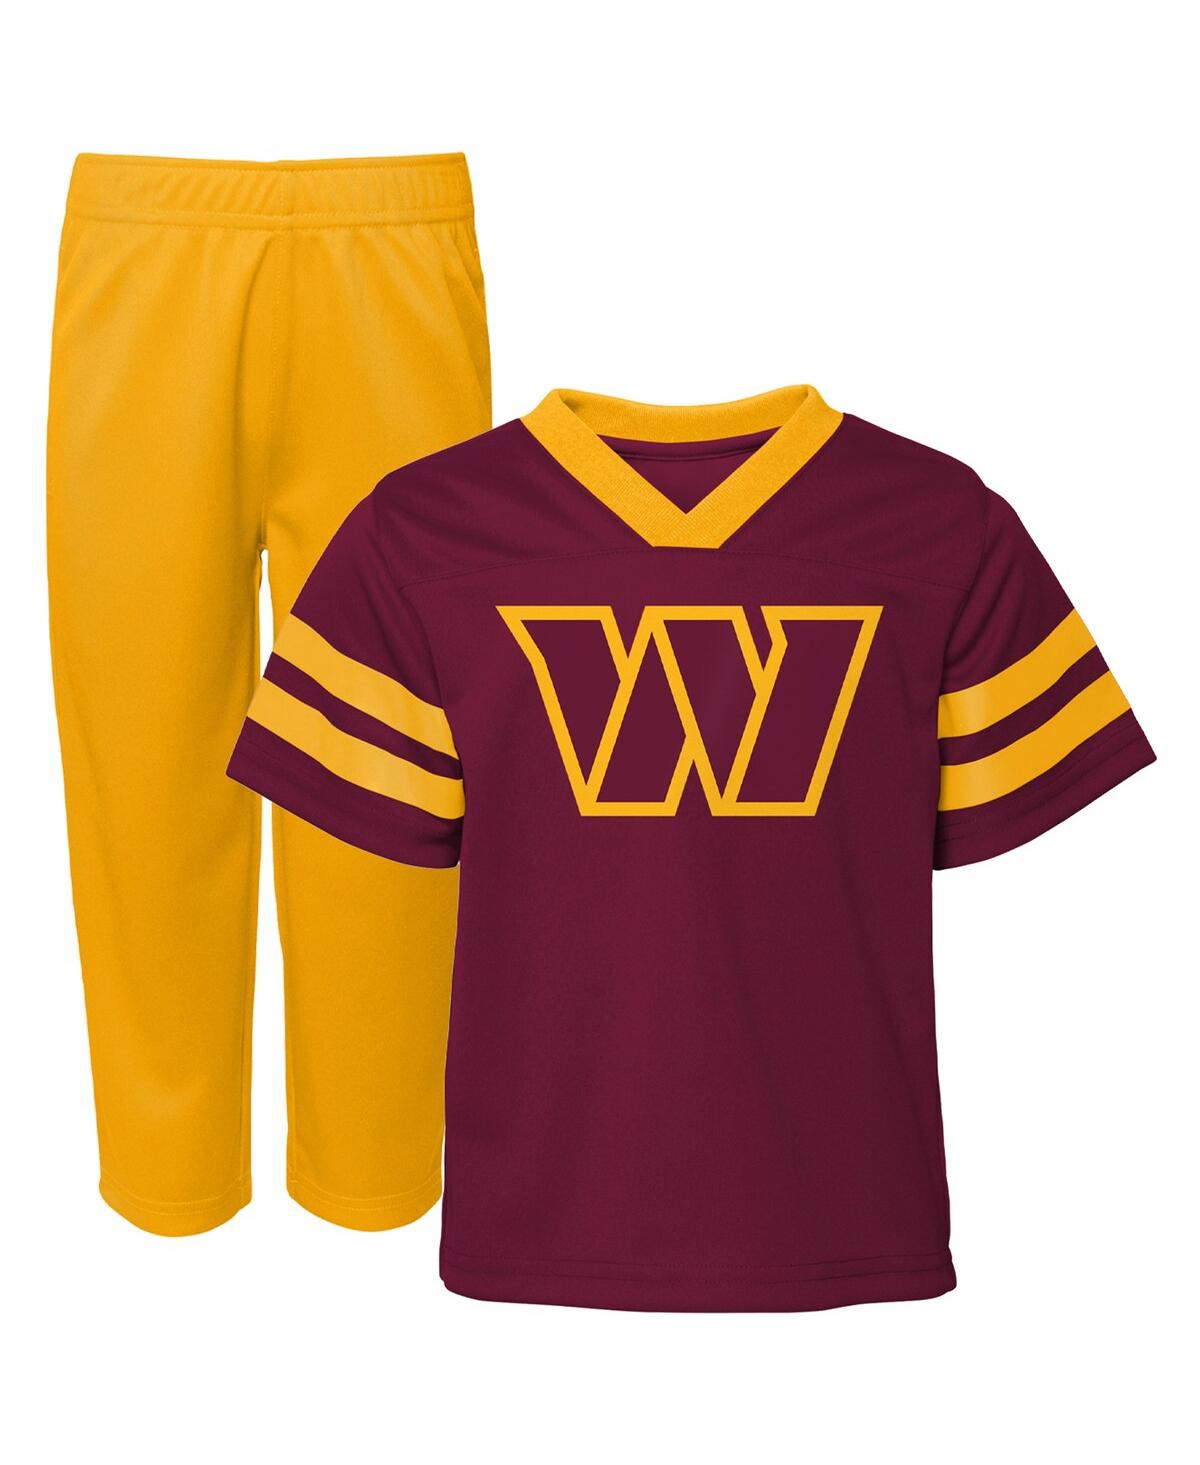 Outerstuff Babies' Toddler Boys Burgundy, Gold Washington Commanders Red Zone V-neck Jersey Top And Pants Set In Burgundy,gold